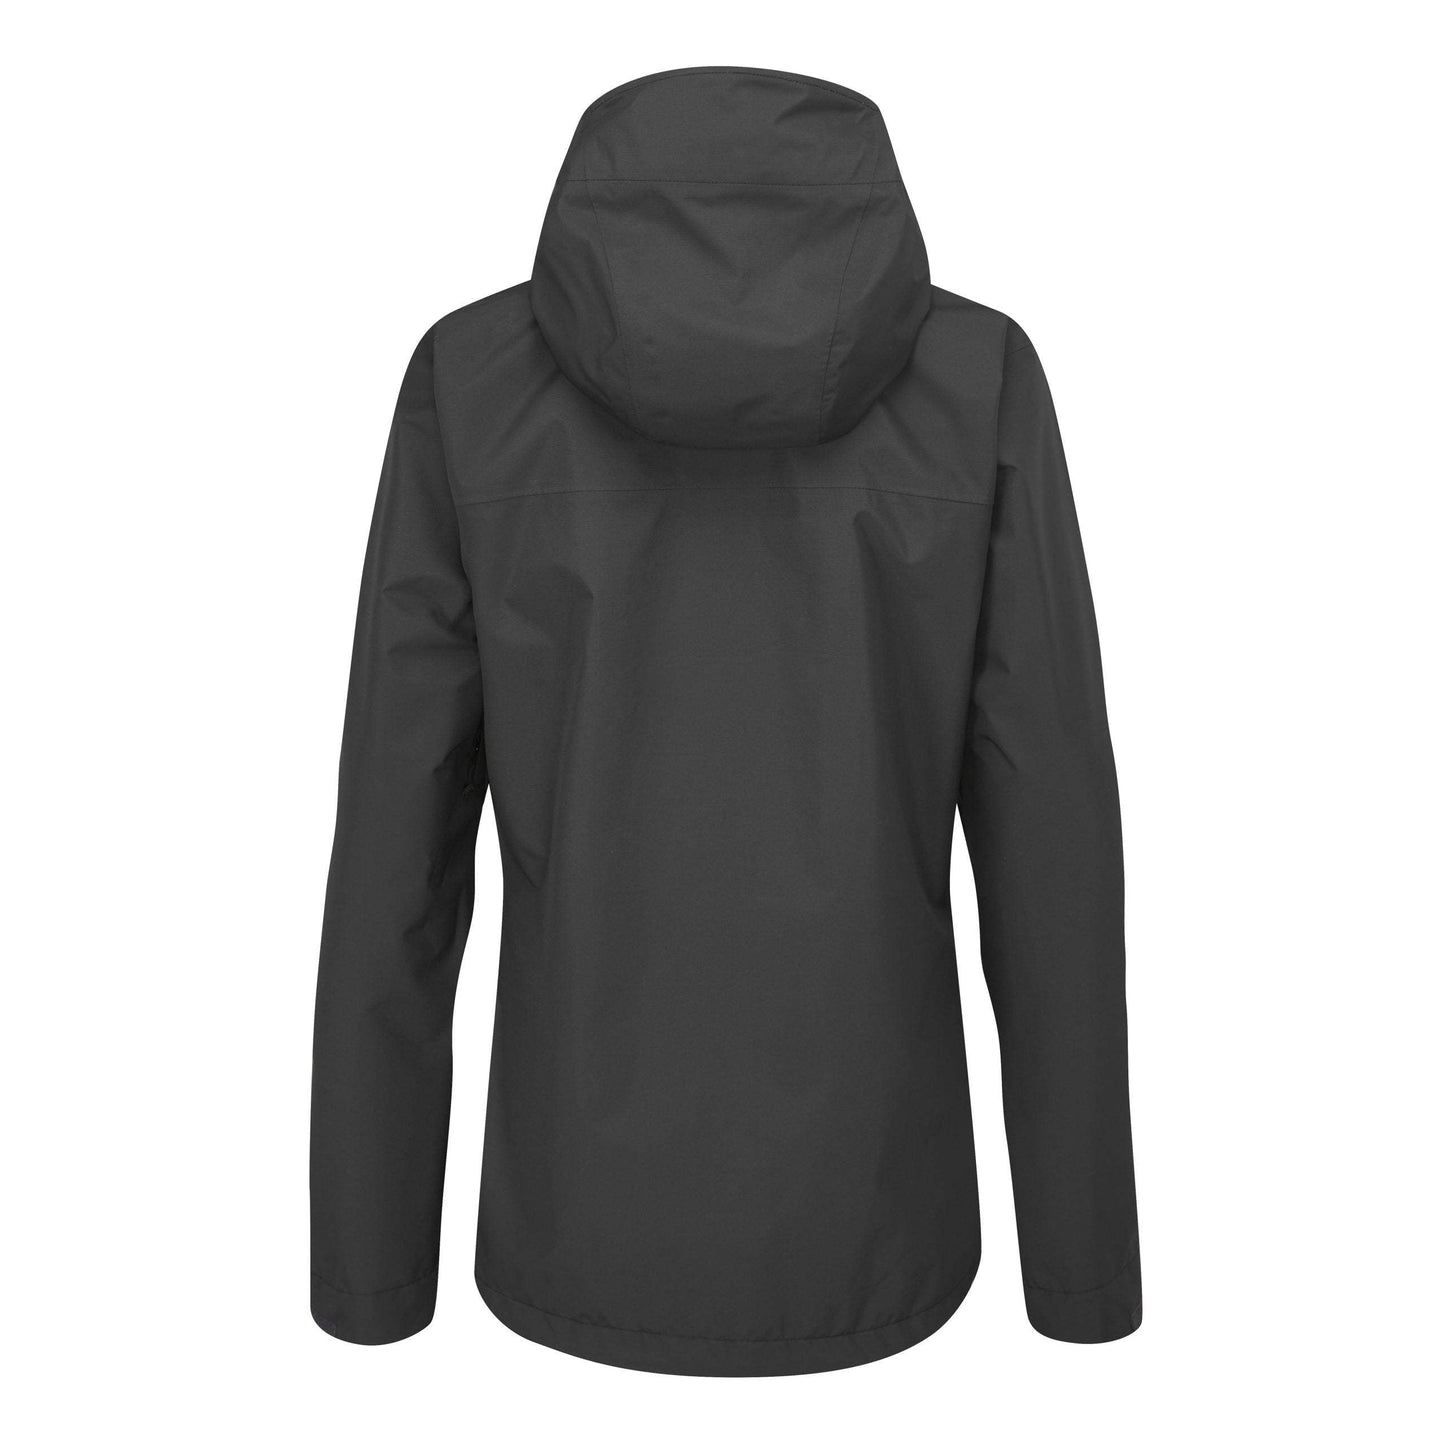 Women's Downpour Eco Jacket by RAB